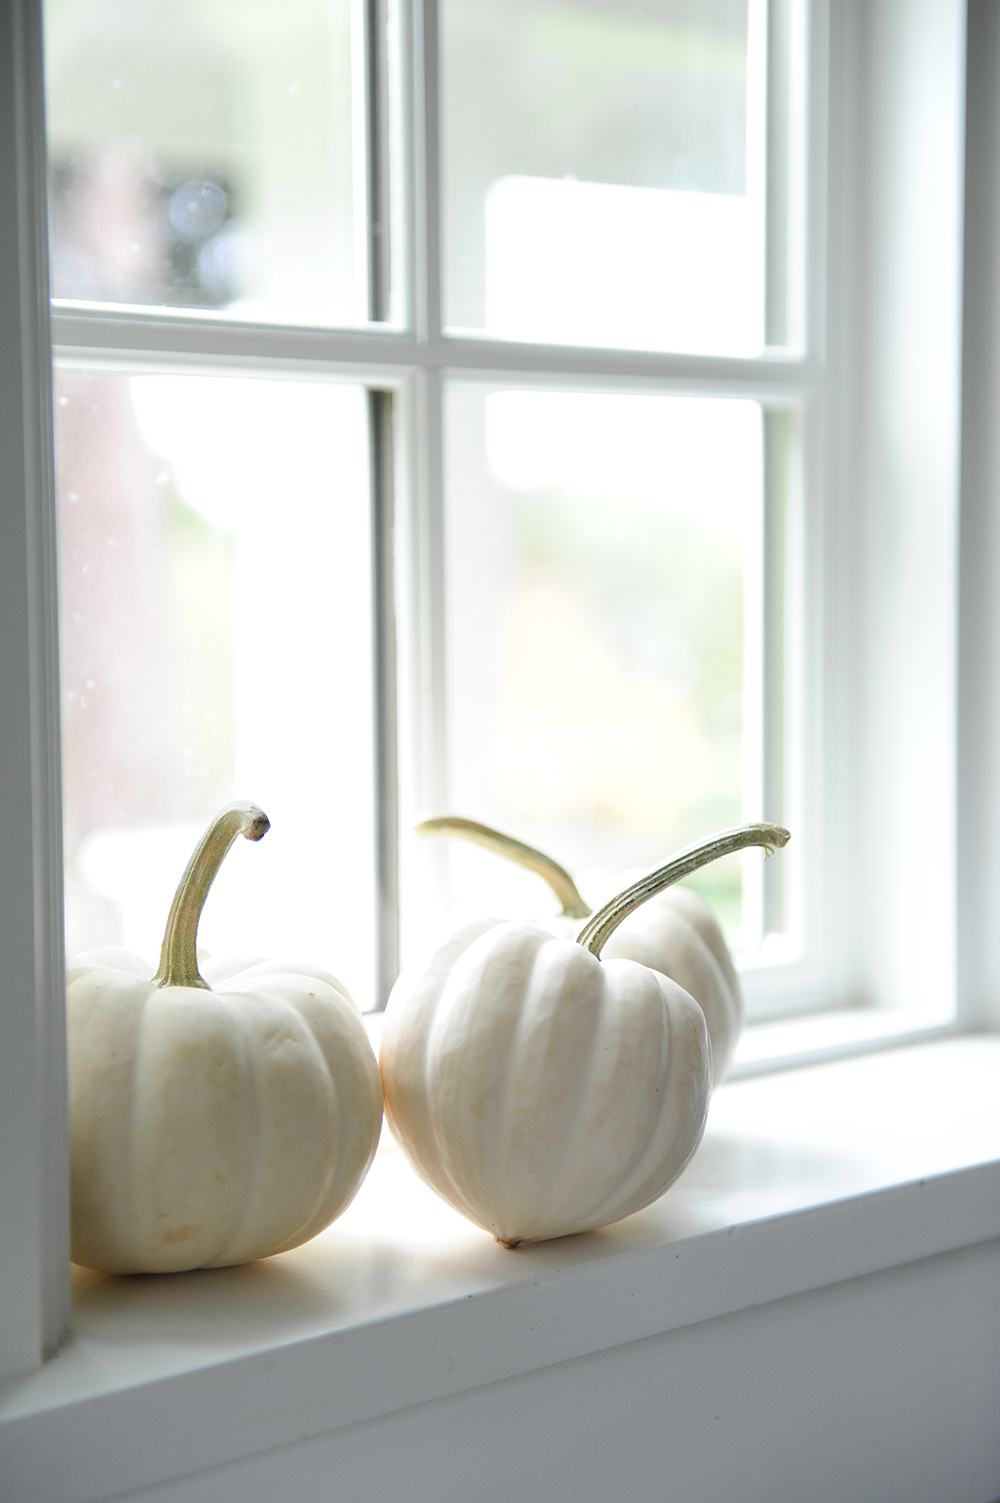 A simple display of white gourds.